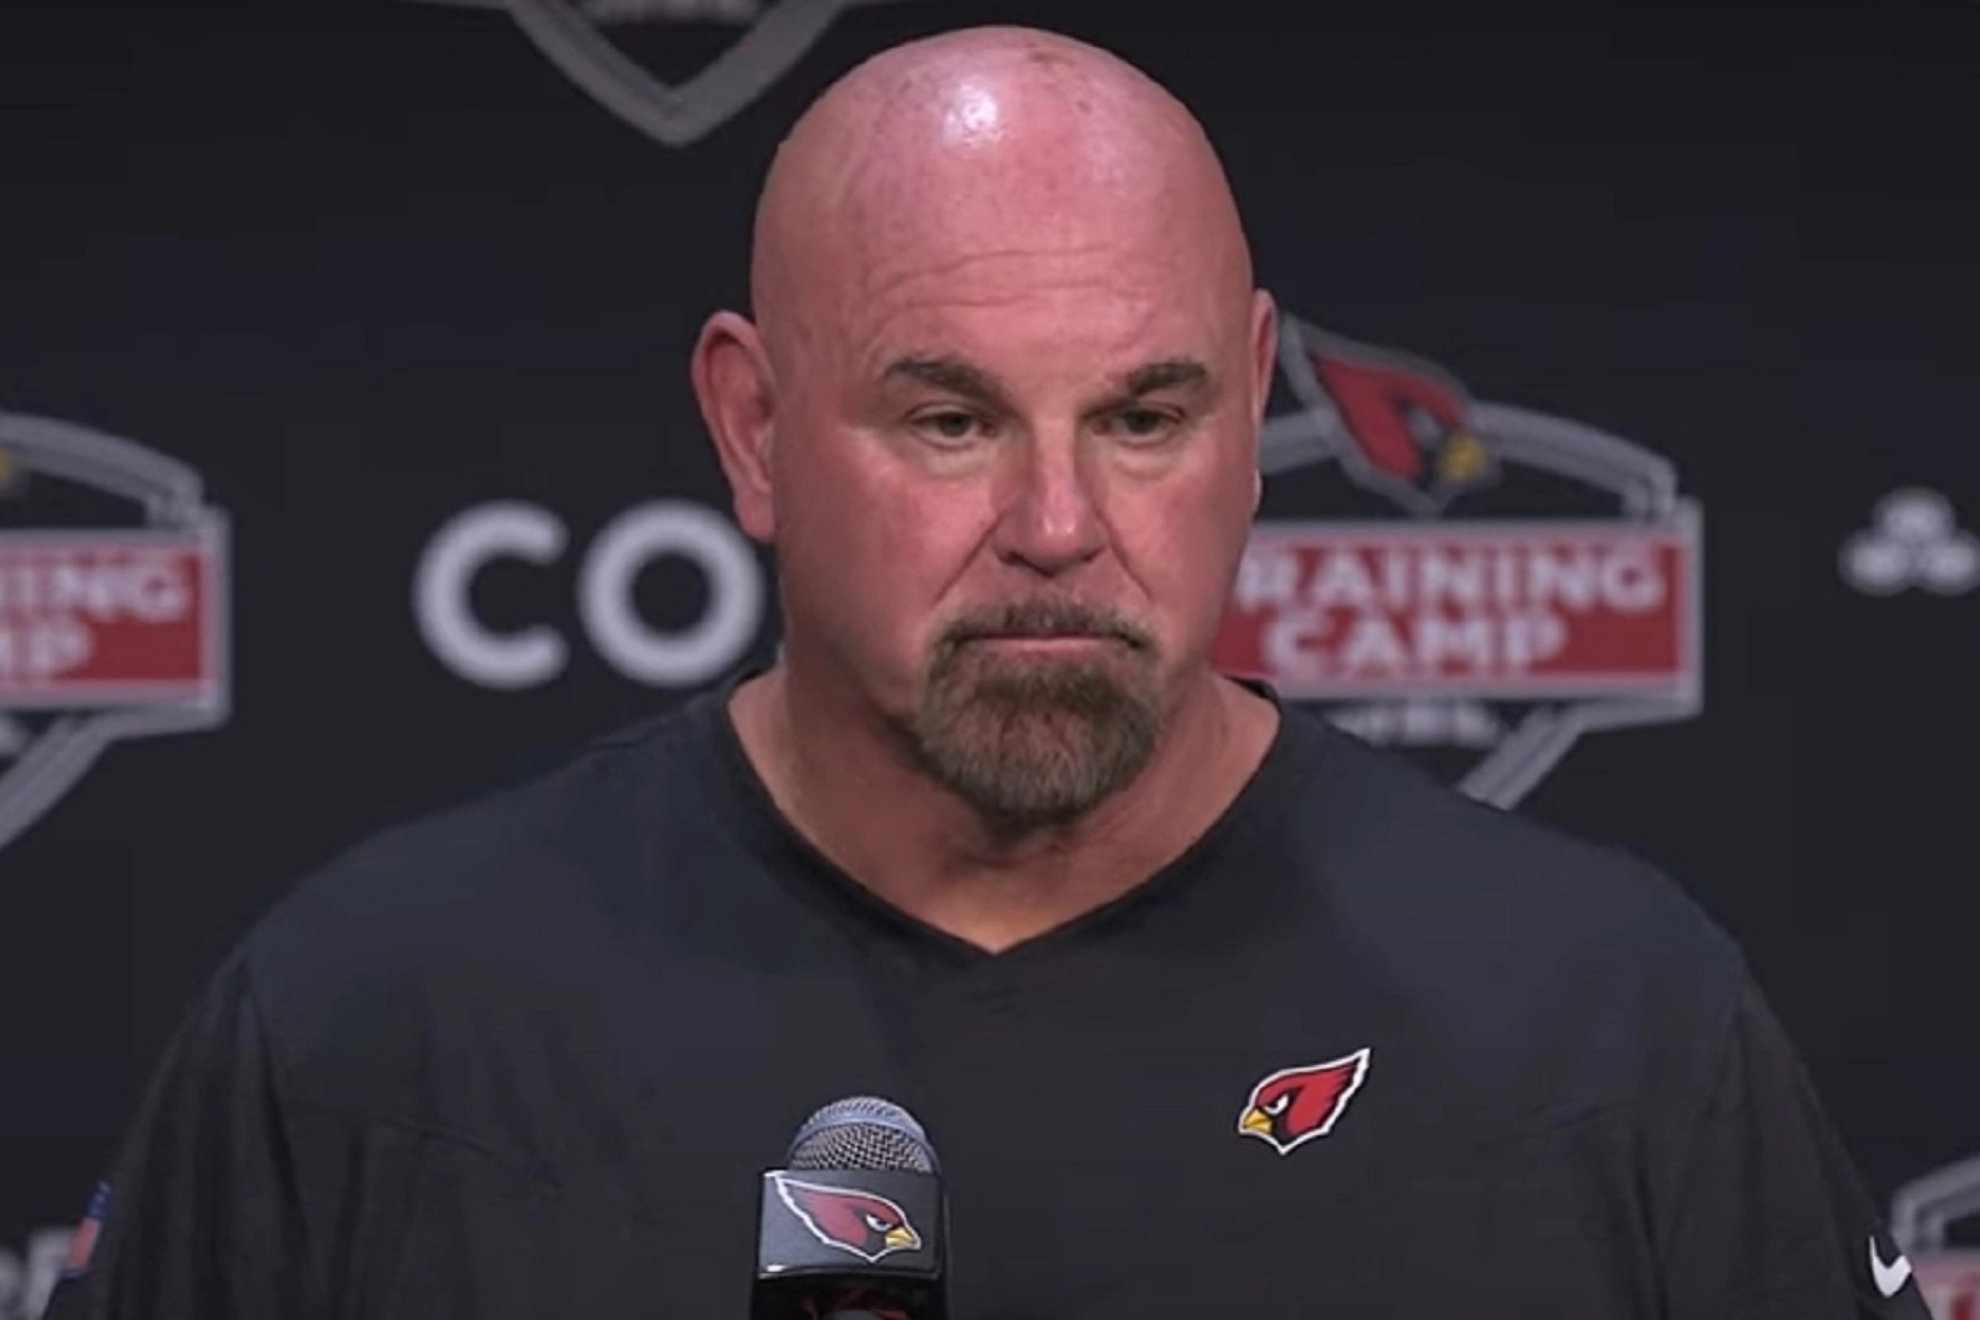 The Arizona Cardinals have parted ways with Sean Kugler